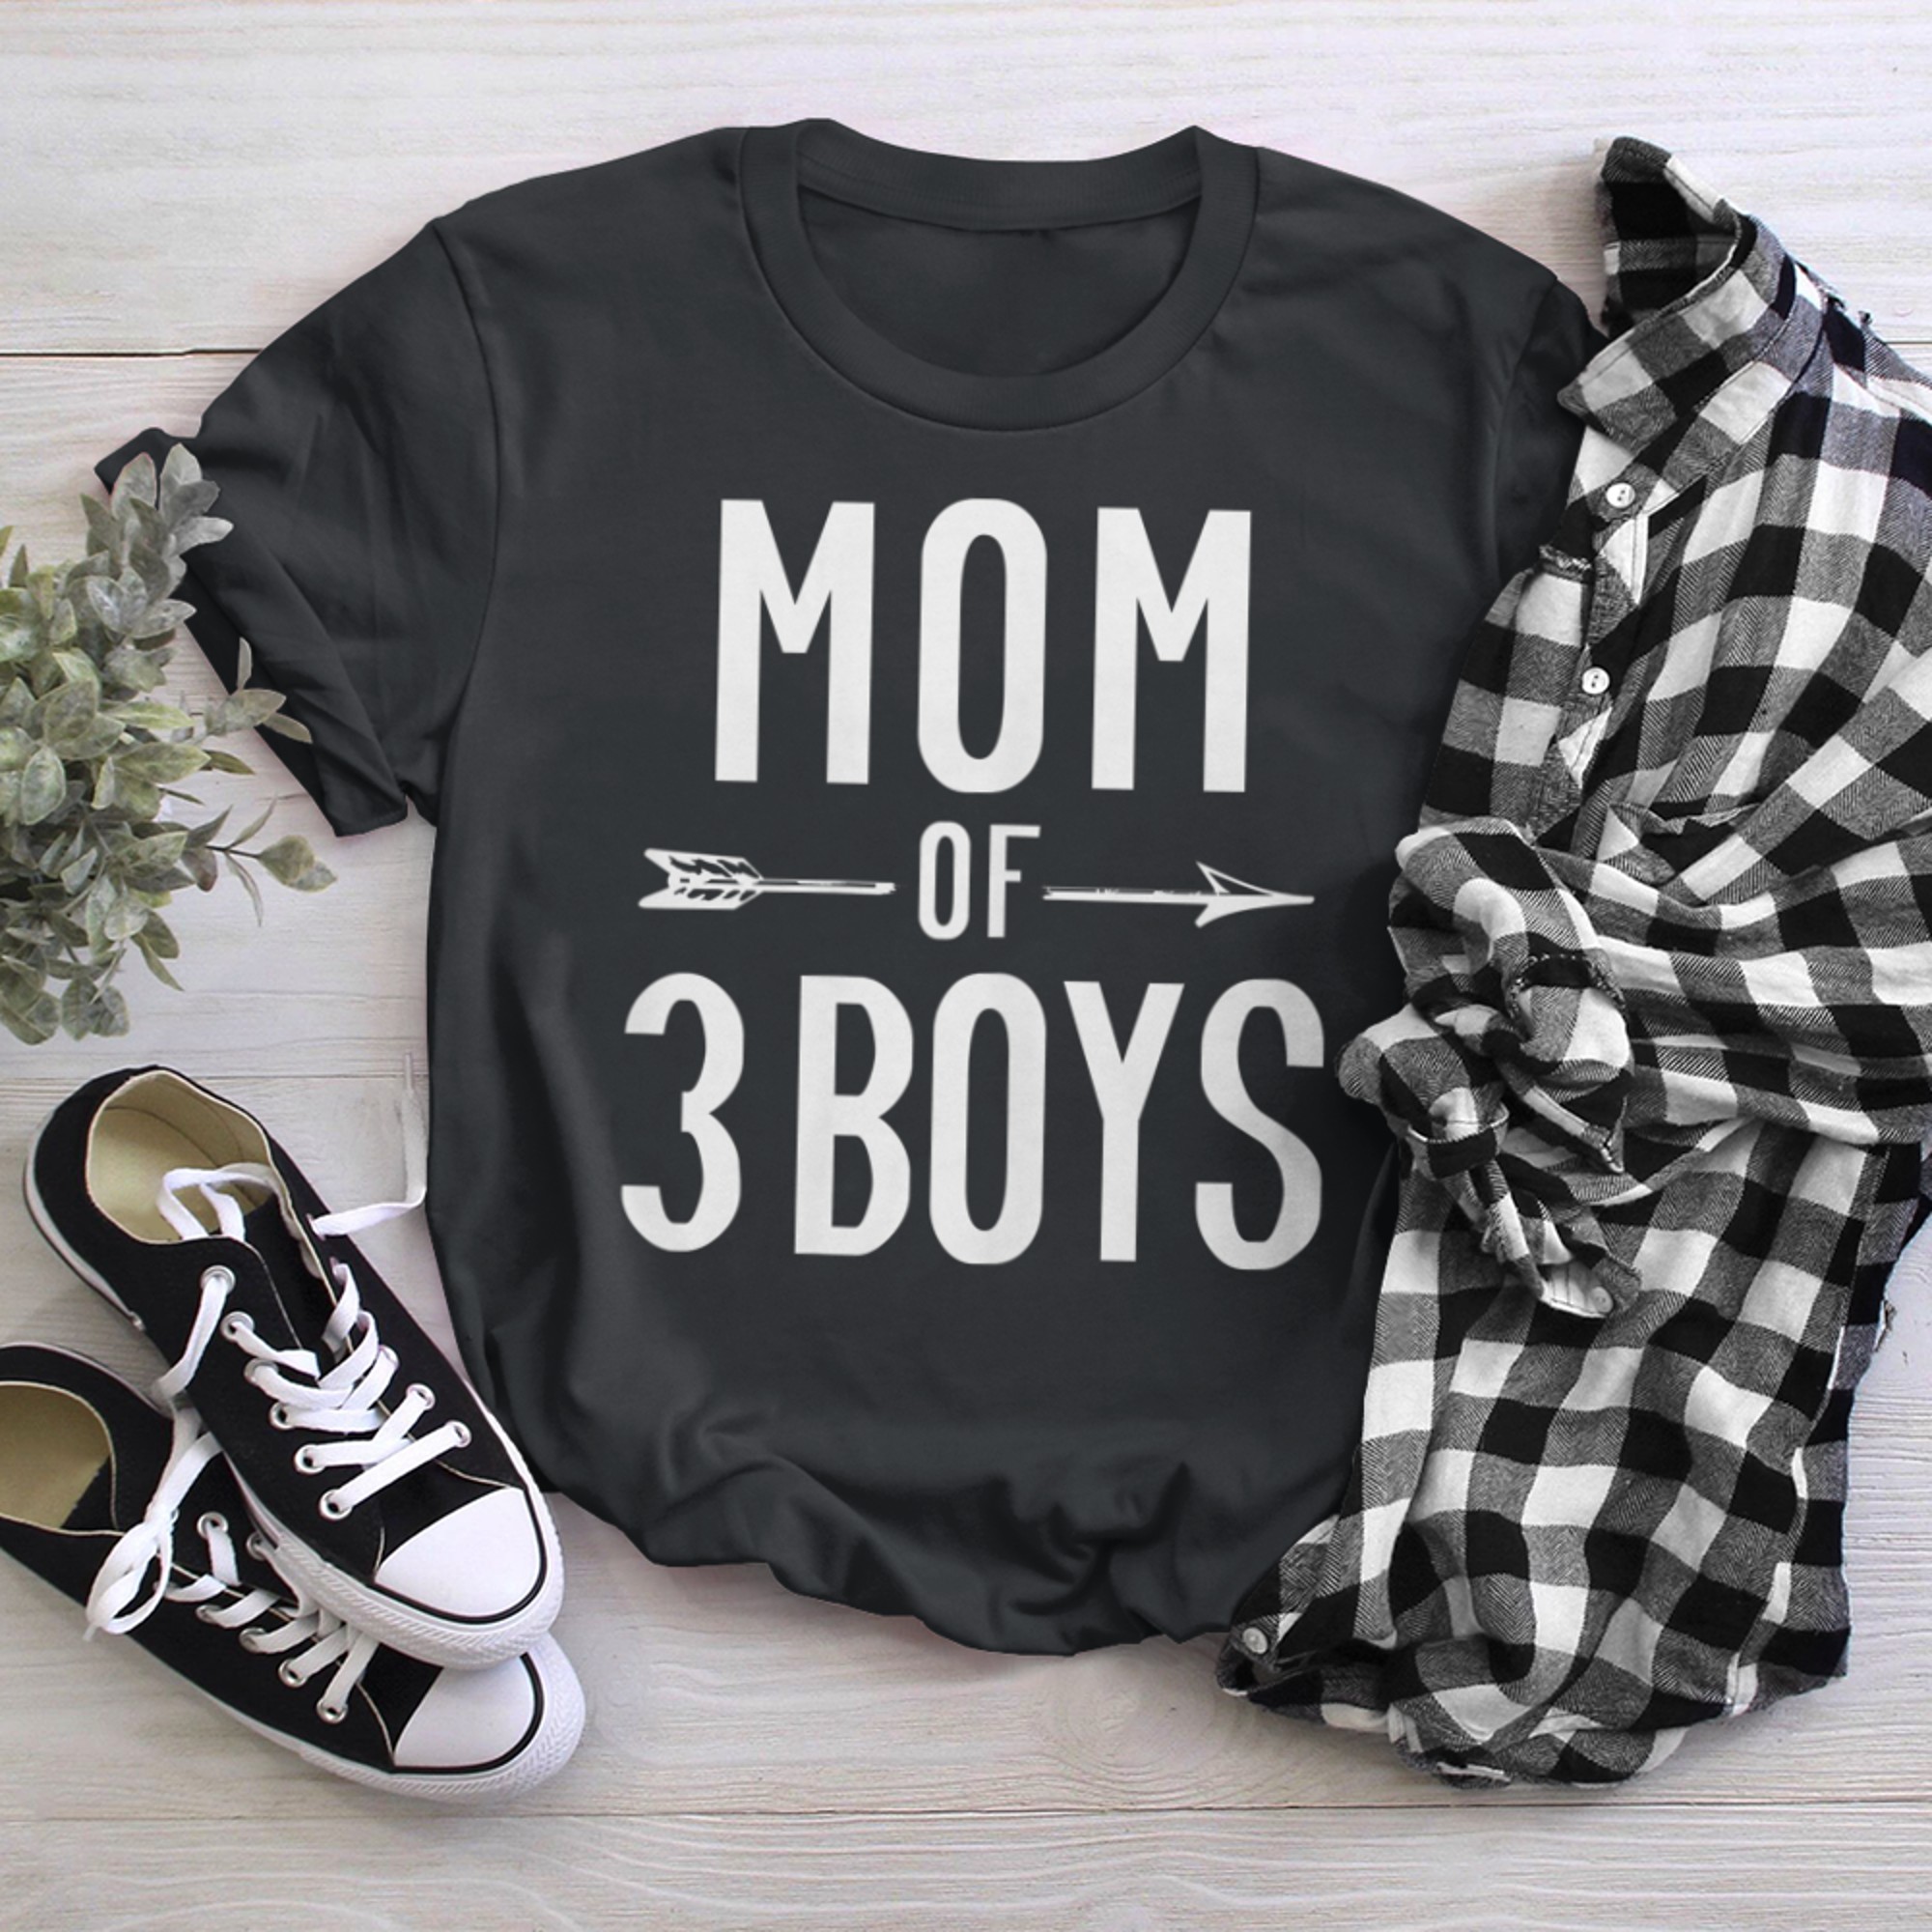 Mom Of - Funny Cute Mothers Day For Mom t-shirt black